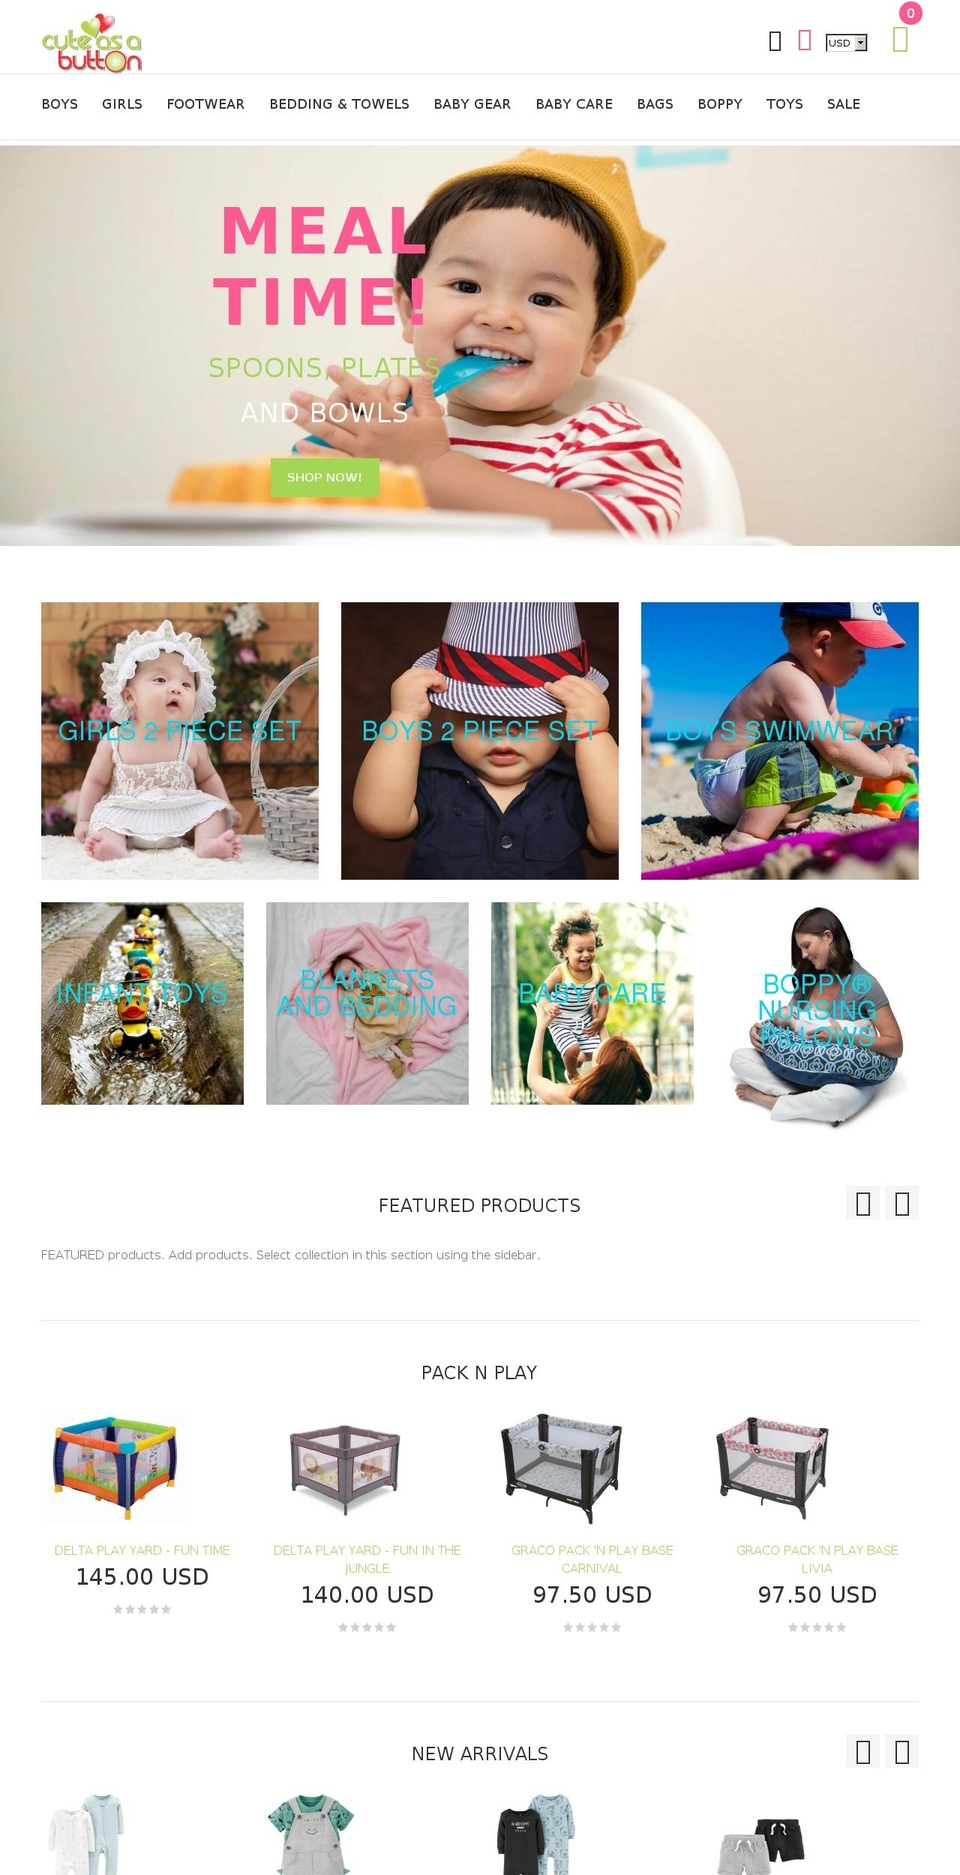 Vision Shopify theme site example socute.sr